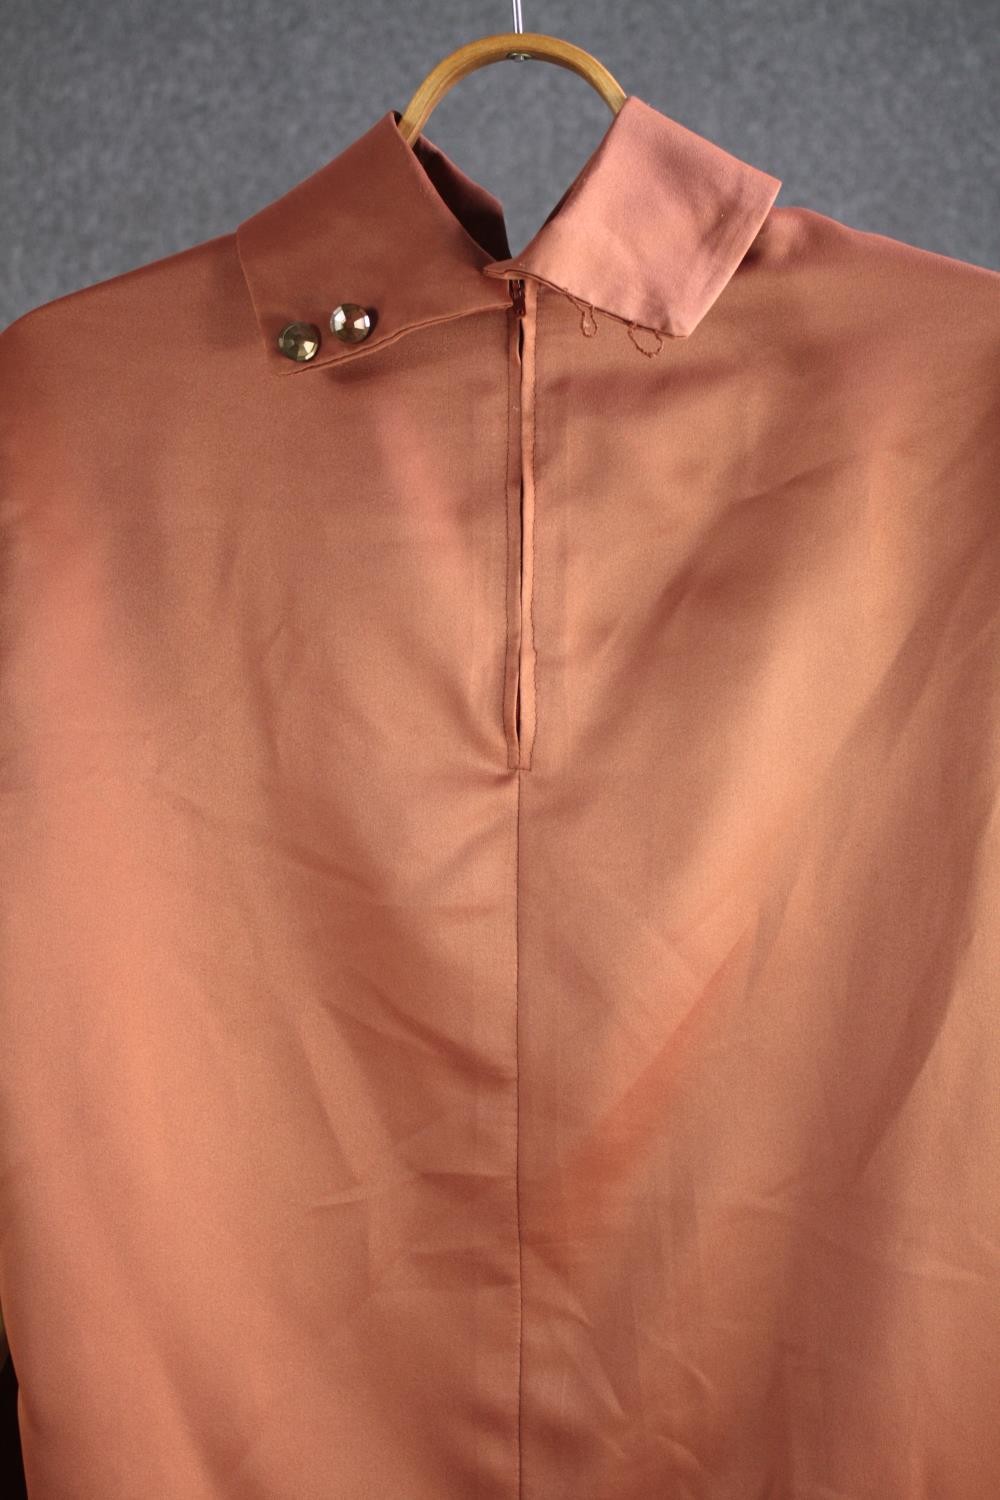 Two bespoke made silk shirts, one salmon and one gold with mother of pearl buttons. - Image 2 of 6